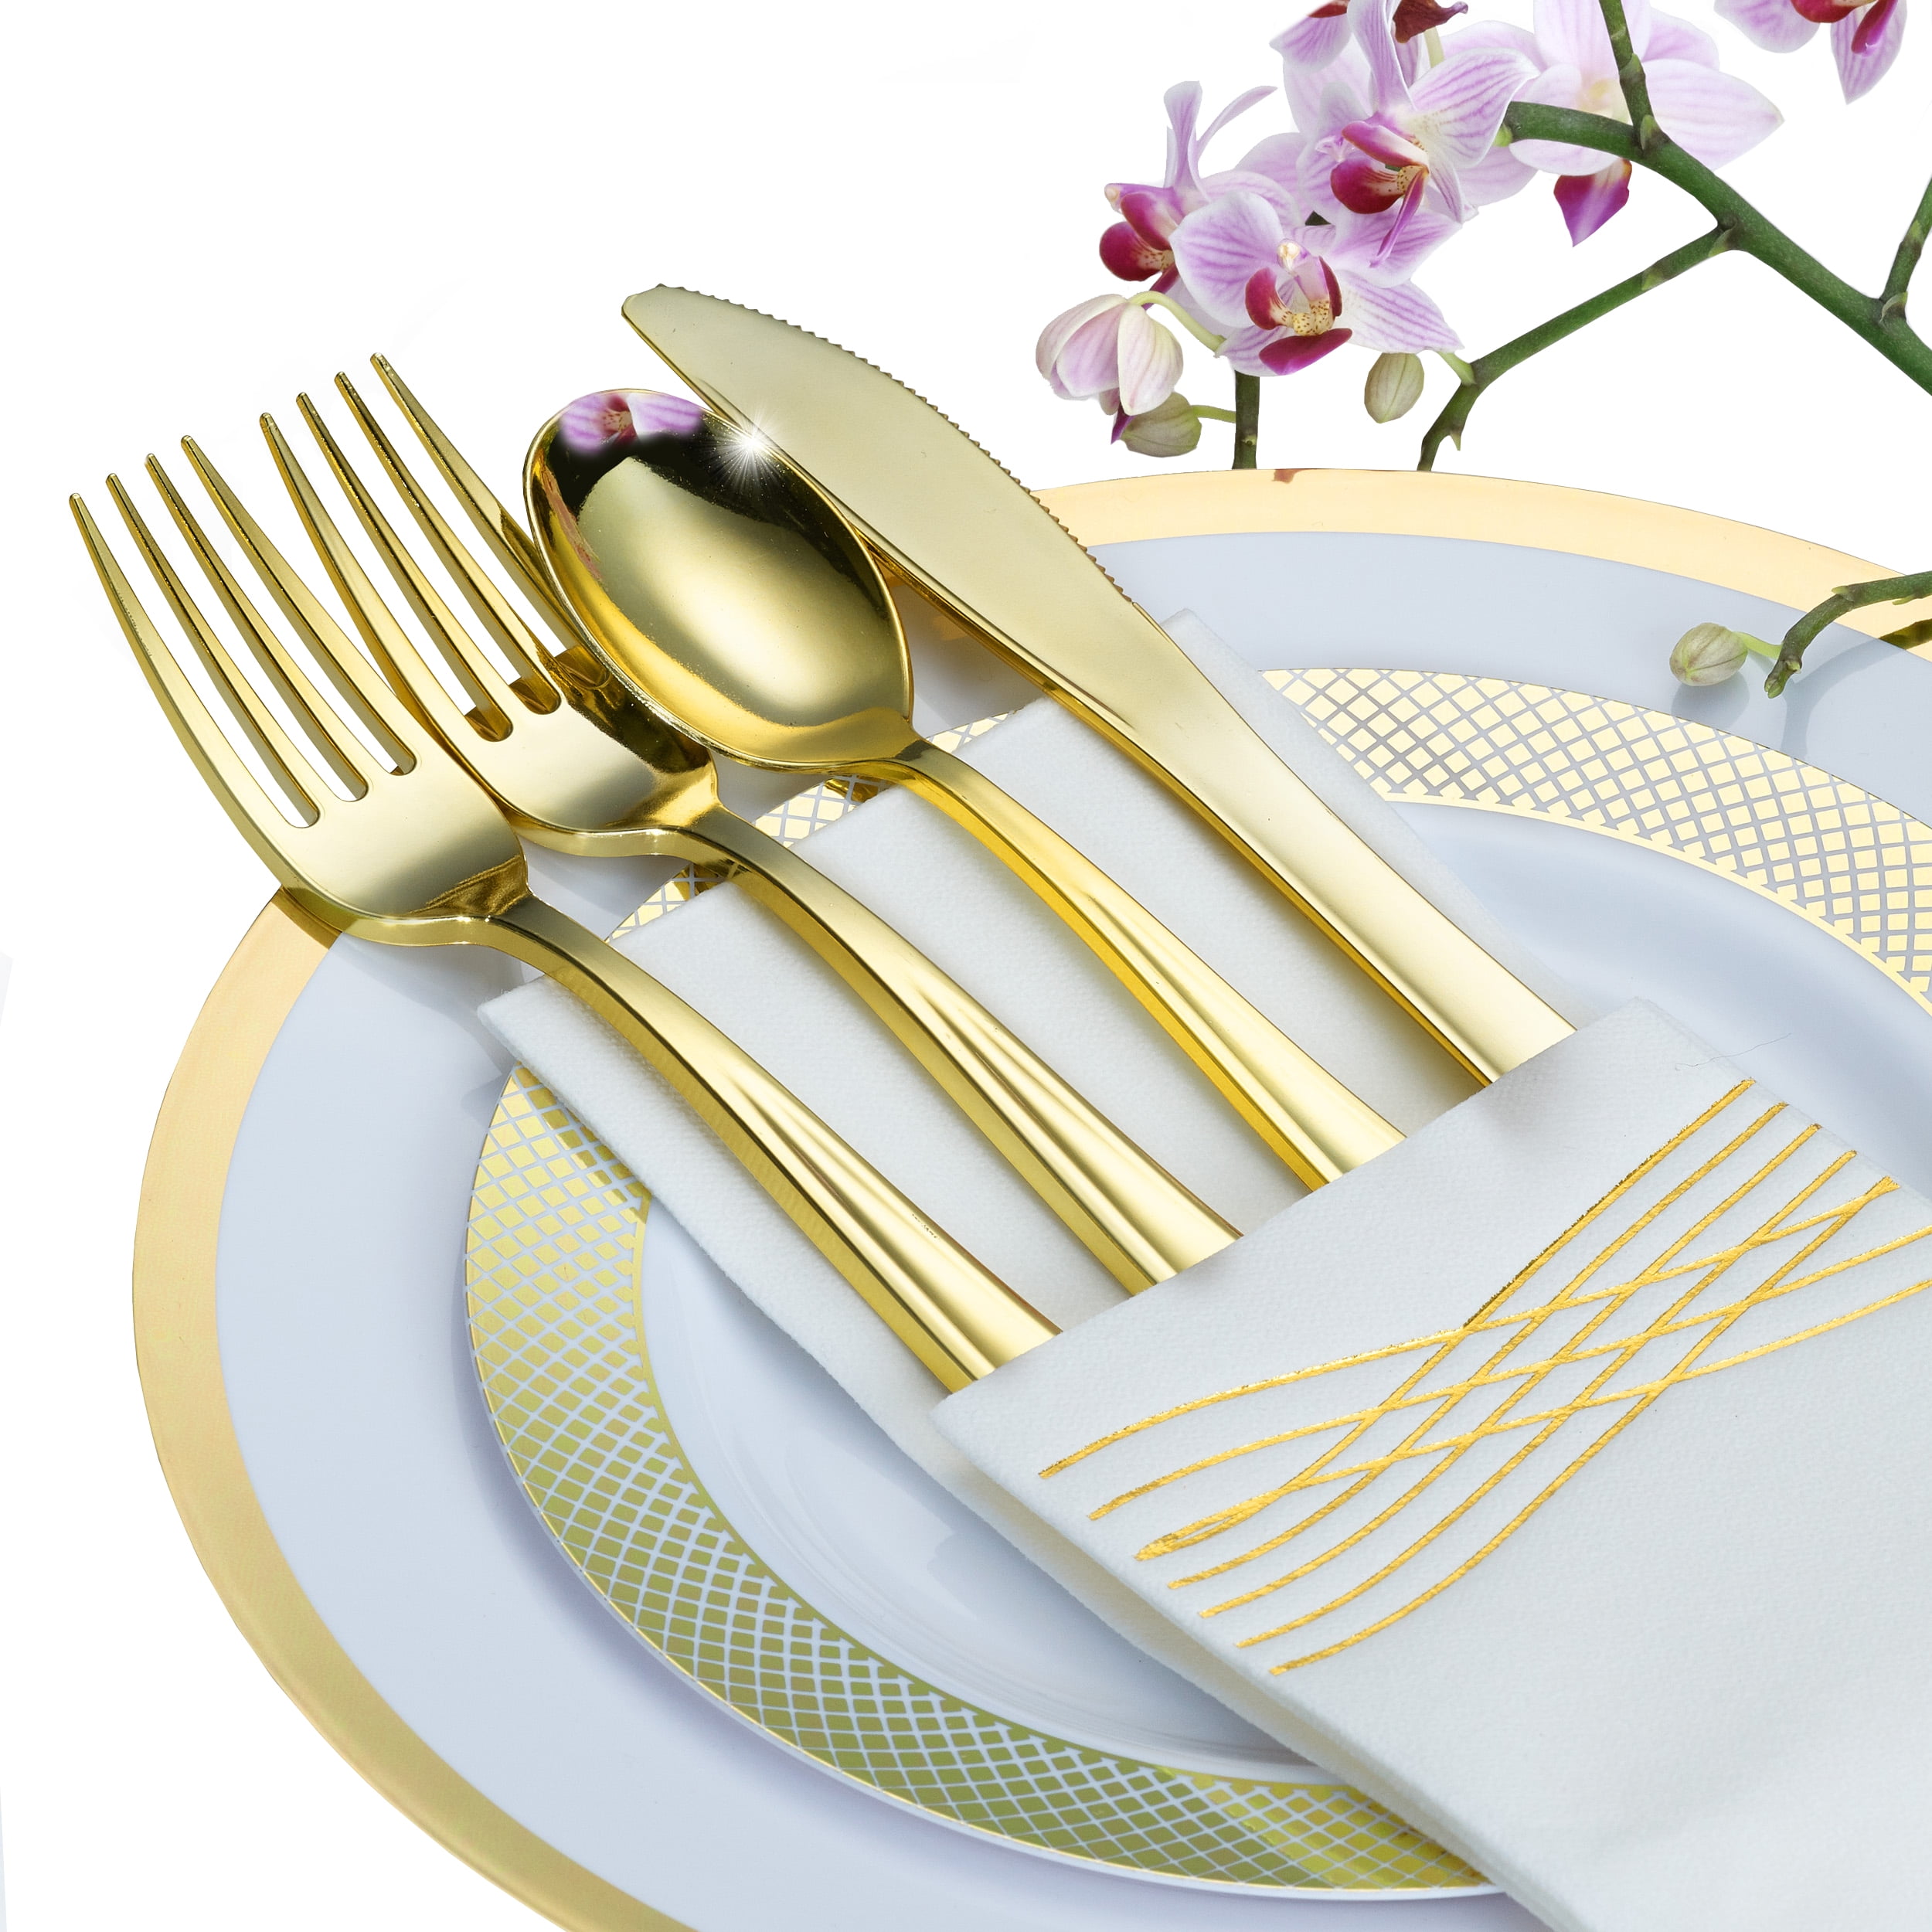 By Madee: (New) Premium 175 Pc Gold Plastic Dinnerware Set - Elegant Disposable Plates Party Plates, Metalic Foil Stamped Linen-feel Napkins, and Plastic Silverware Set For 25 Guests